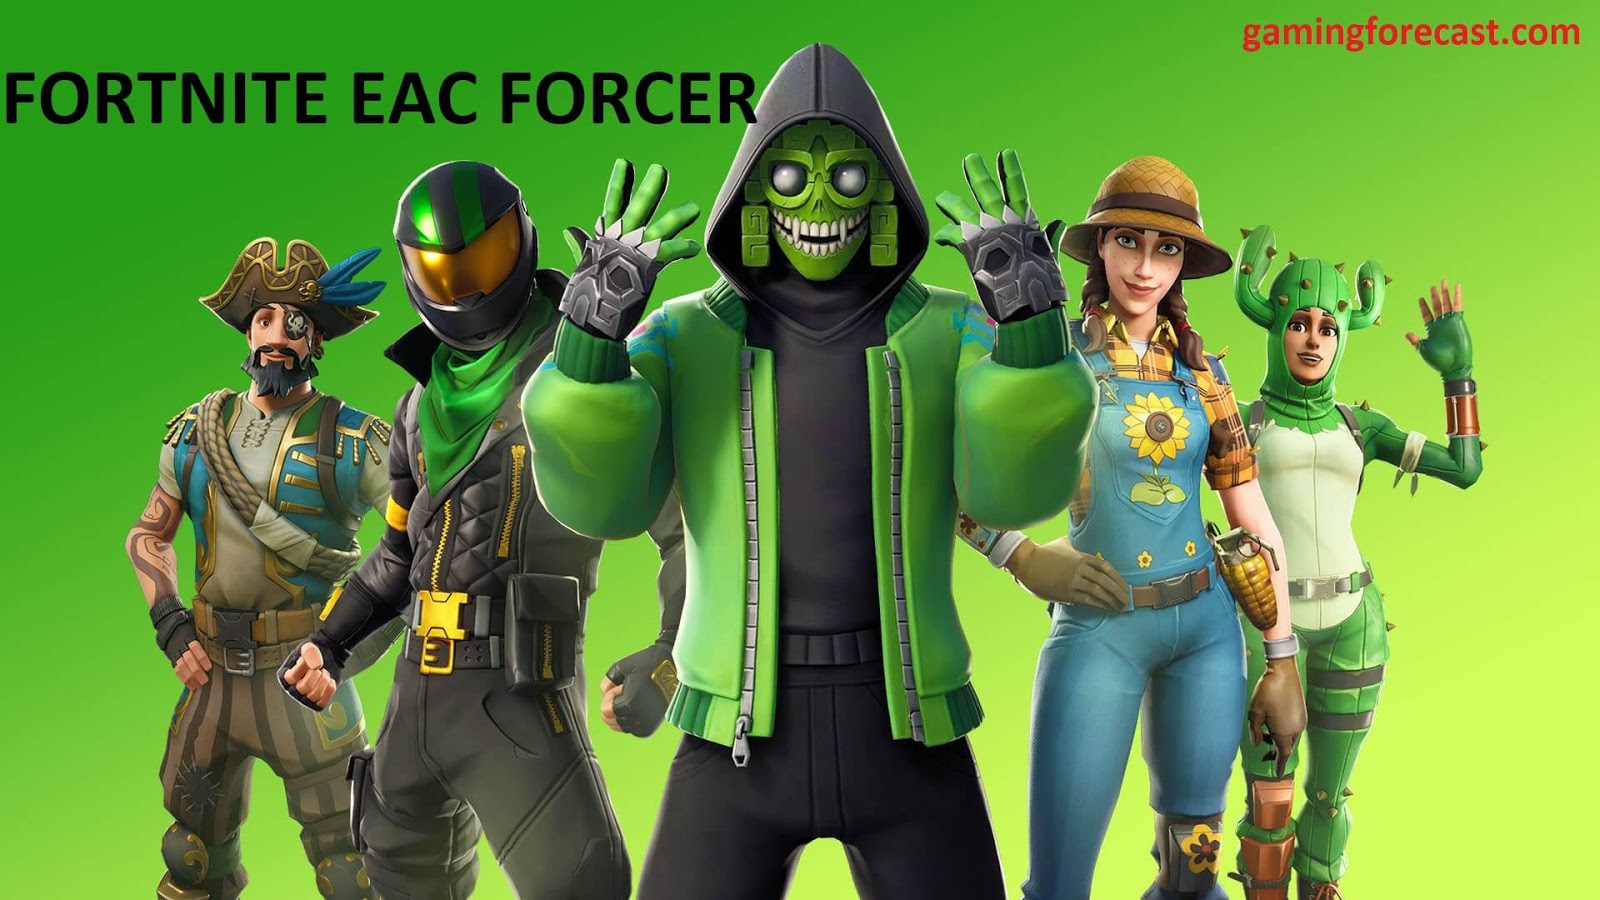 Eac Forcer Use Eac Instead Of Be Using Spoofer And Cheats 21 Gaming Forecast Download Free Online Game Hacks